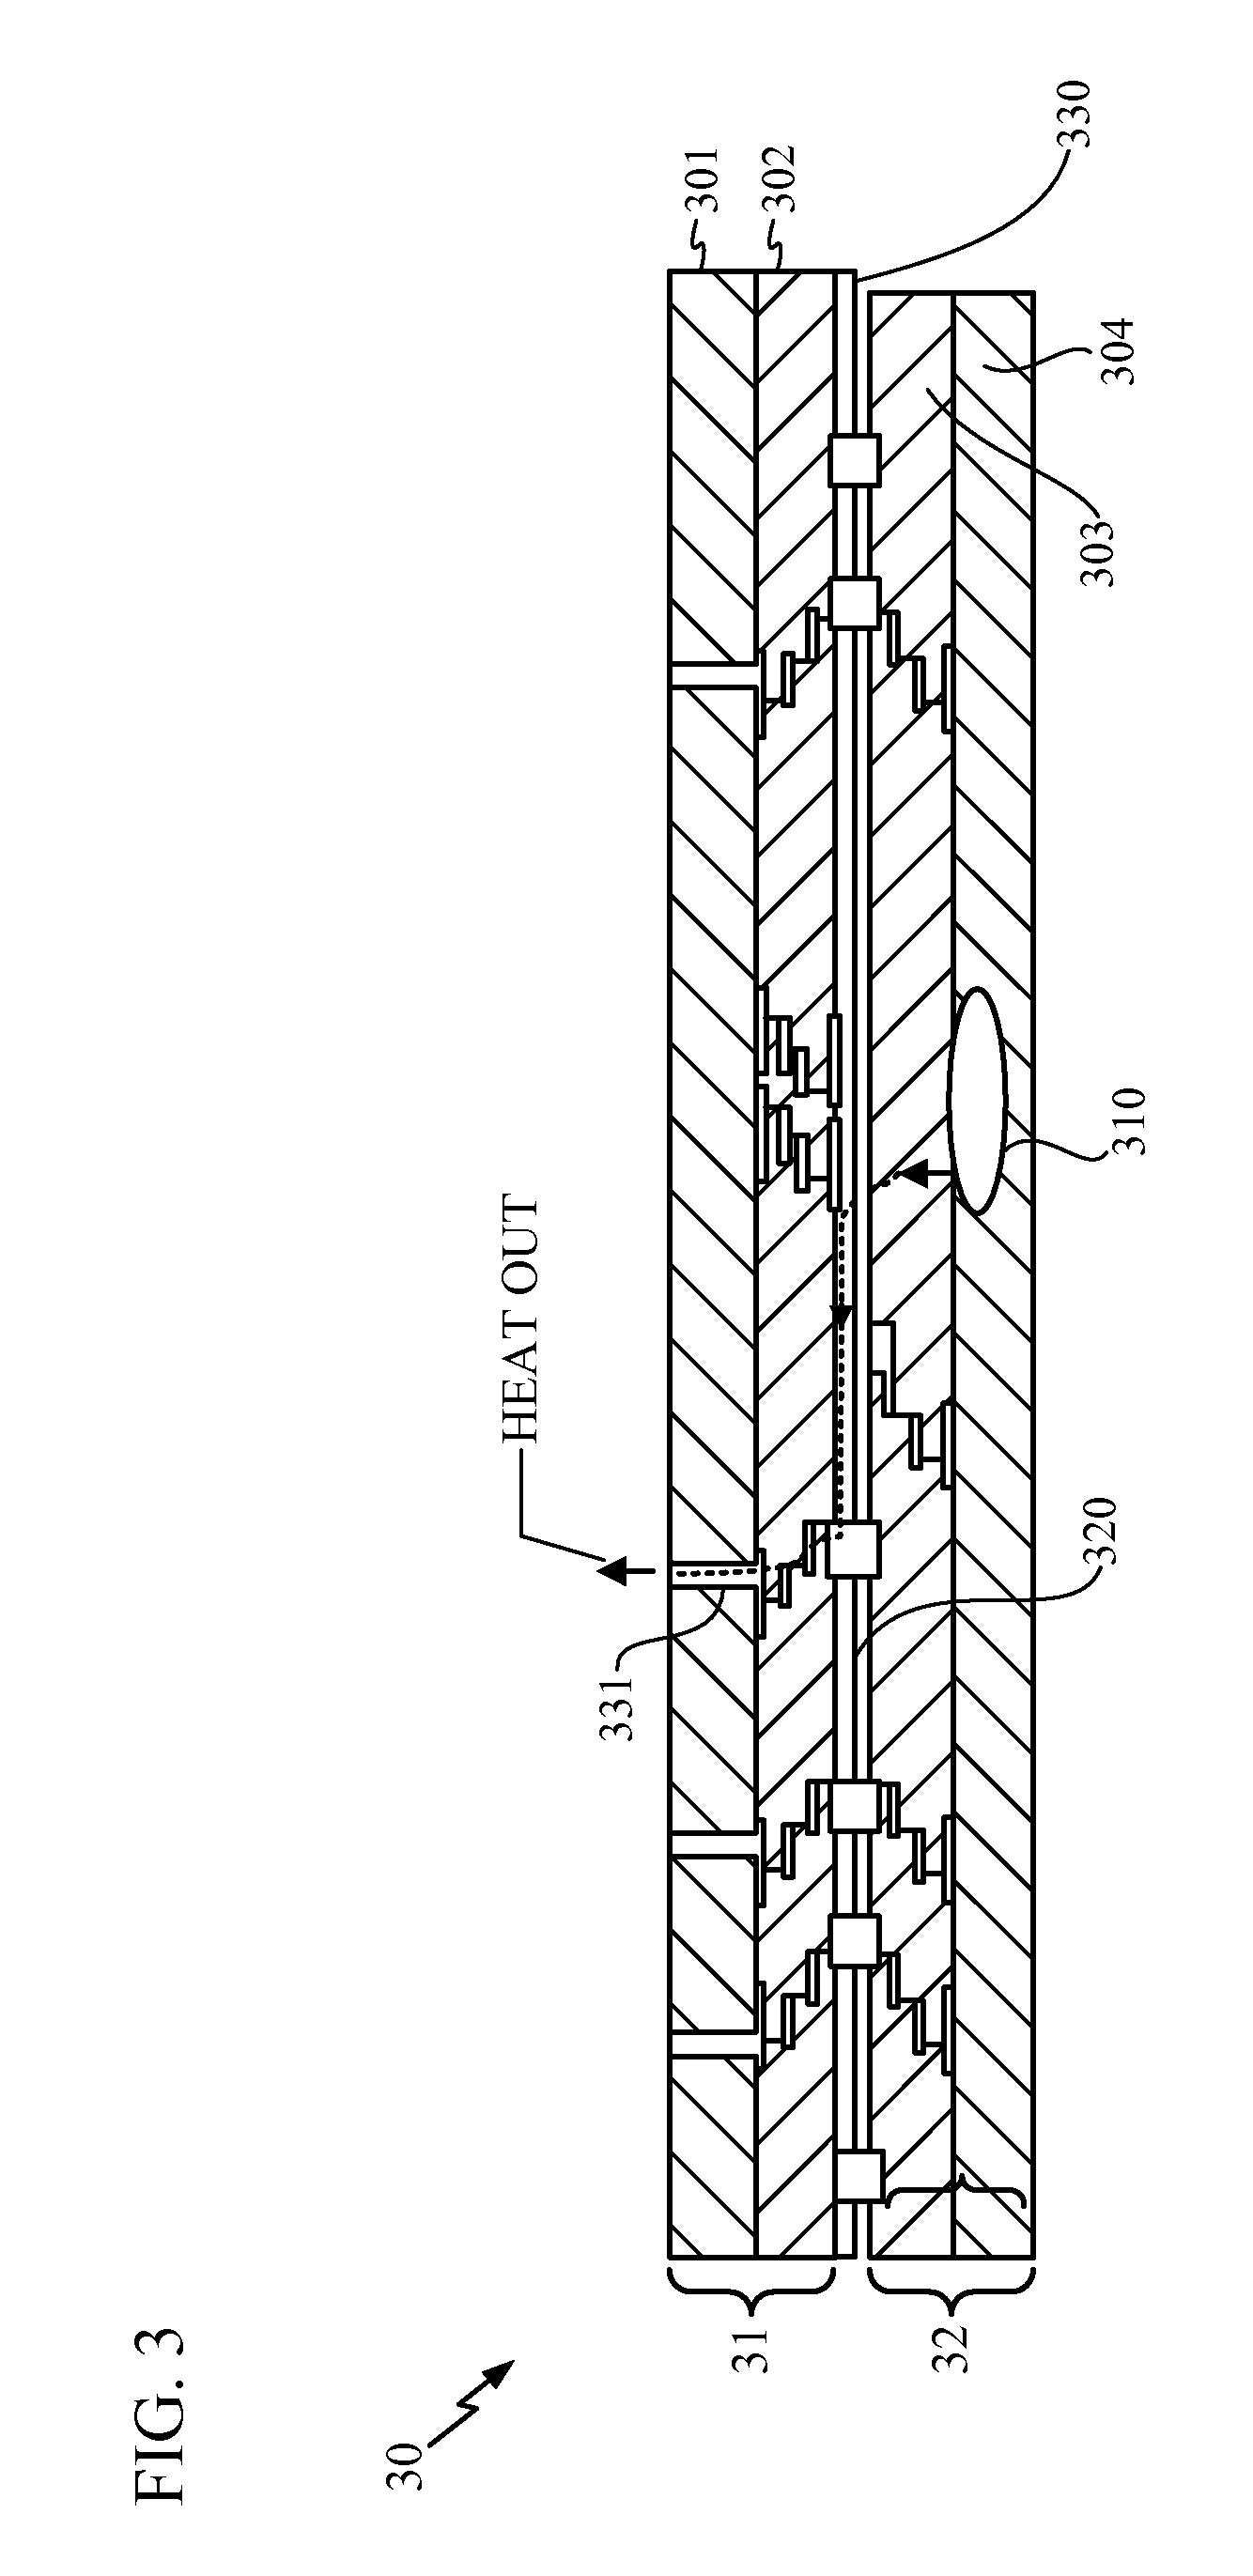 3-D Integrated Circuit Lateral Heat Dissipation